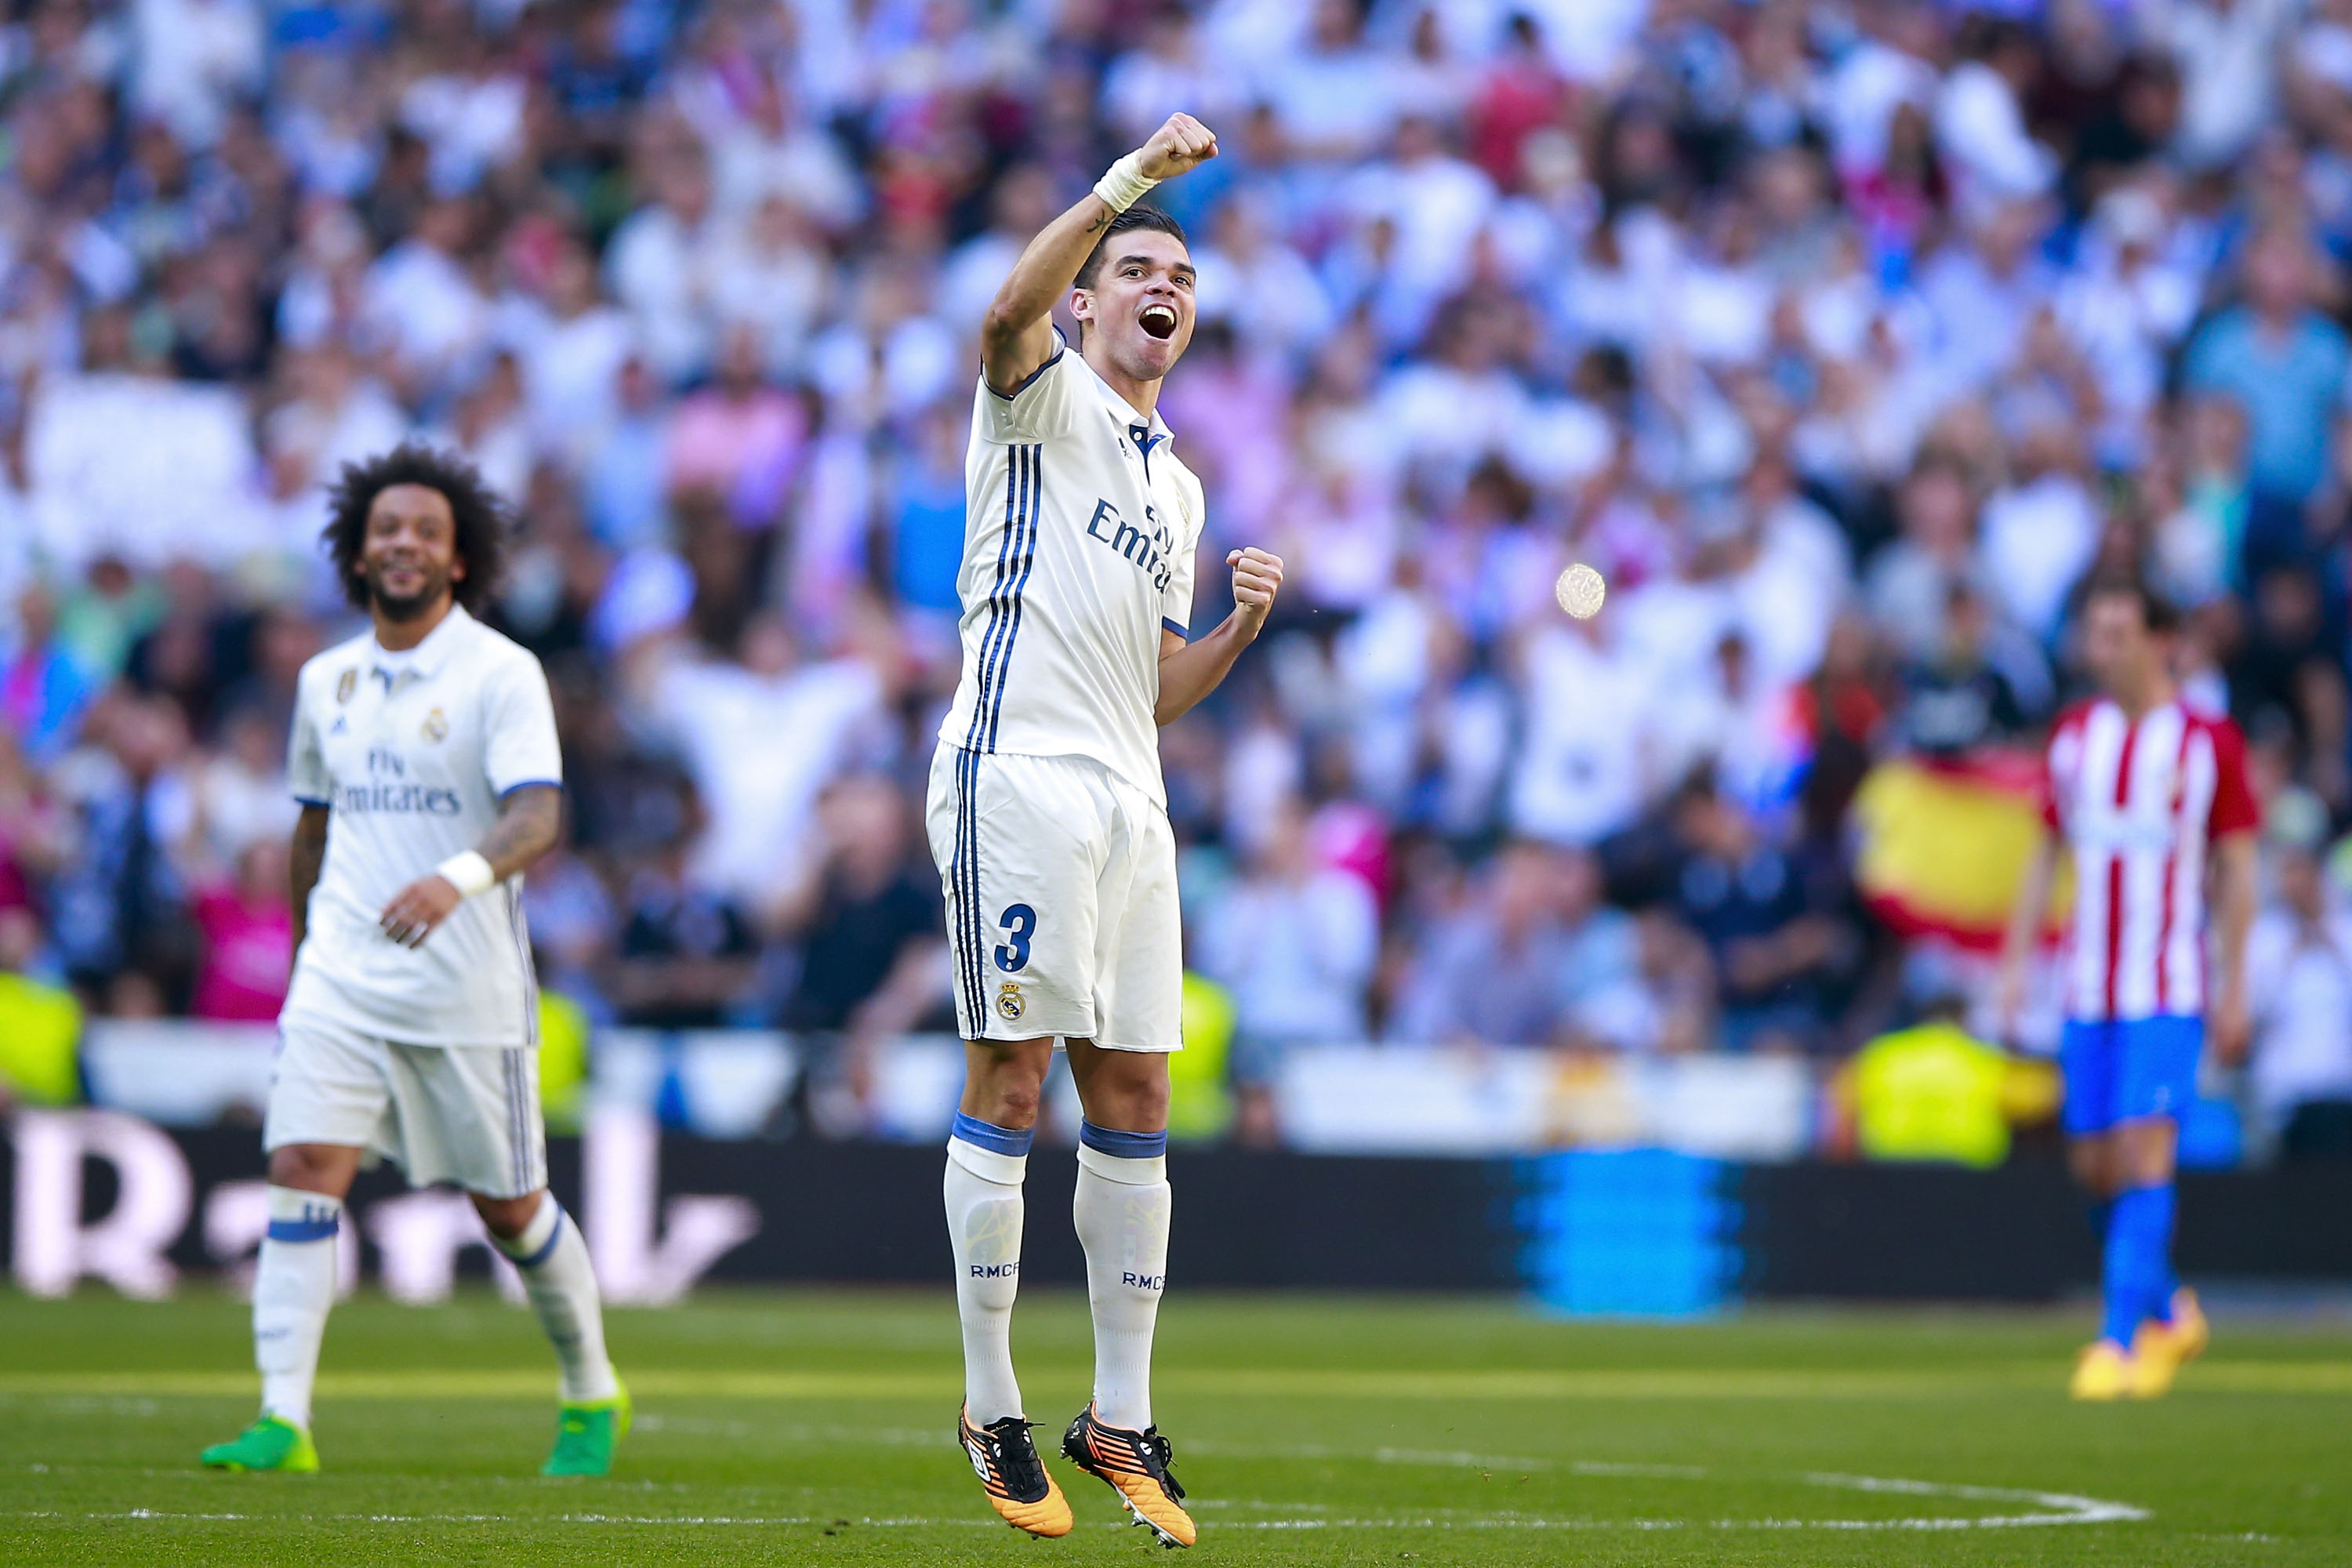 MADRID, SPAIN - APRIL 08: Pepe of Real Madrid CF celebrates scoring their opening goal during the La Liga match between Real Madrid CF and Club Atletico de Madrid at Estadio Santiago Bernabeu on April 8, 2017 in Madrid, Spain.  (Photo by Gonzalo Arroyo Moreno/Getty Images)